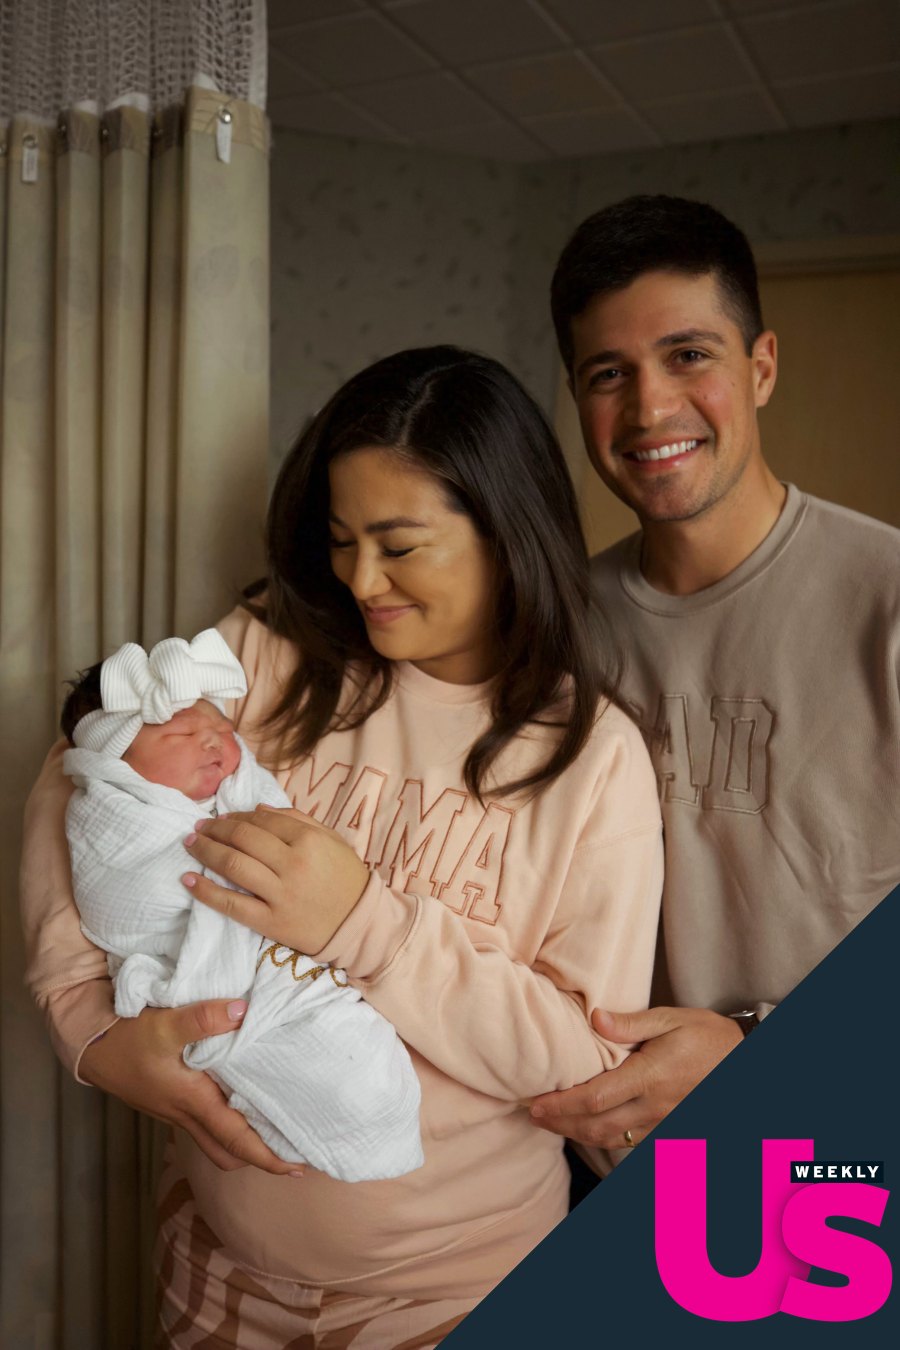 Bachelor’s Caila Quinn Gives Birth, Welcomes Baby No. 1 With Husband Nick Burrello- 'I'm Already Wishing Time Would Slow Down' - 505